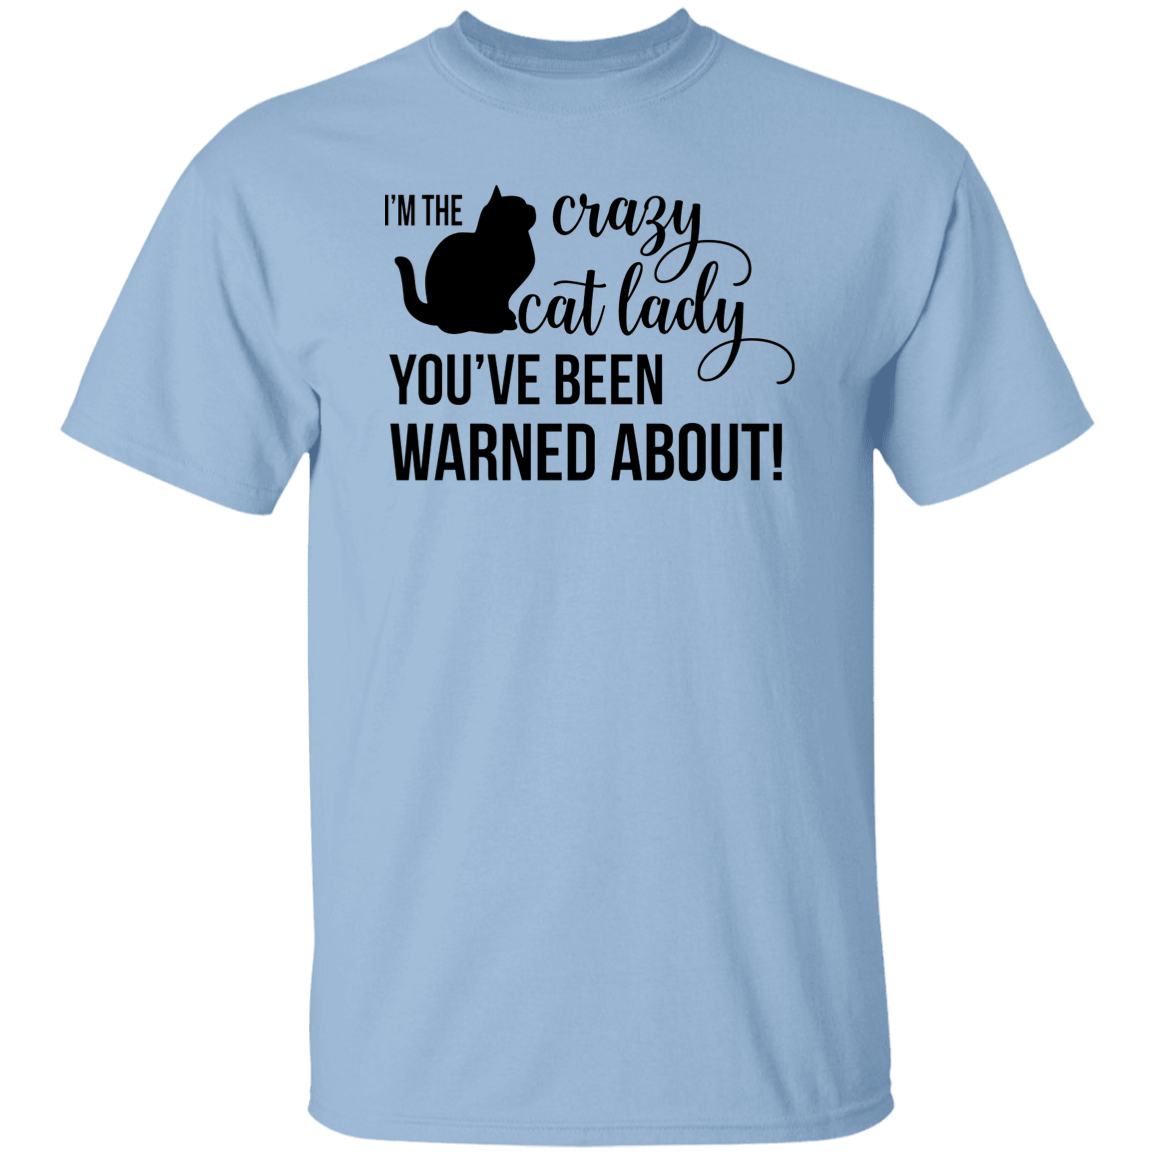 I'm the Crazy Cat Lady You've Been Warned About!  5.3 oz. T-Shirt